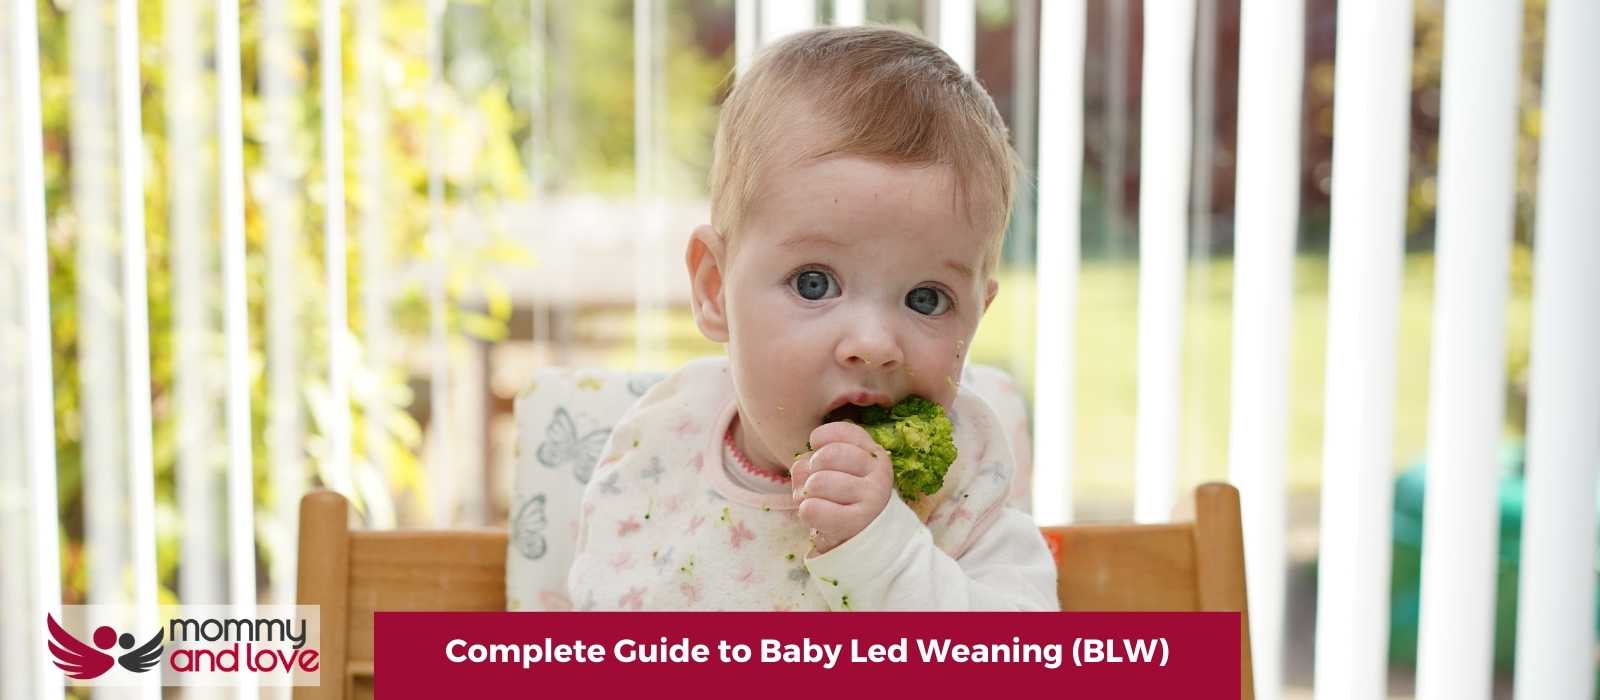 Complete Guide to Baby Led Weaning (BLW)